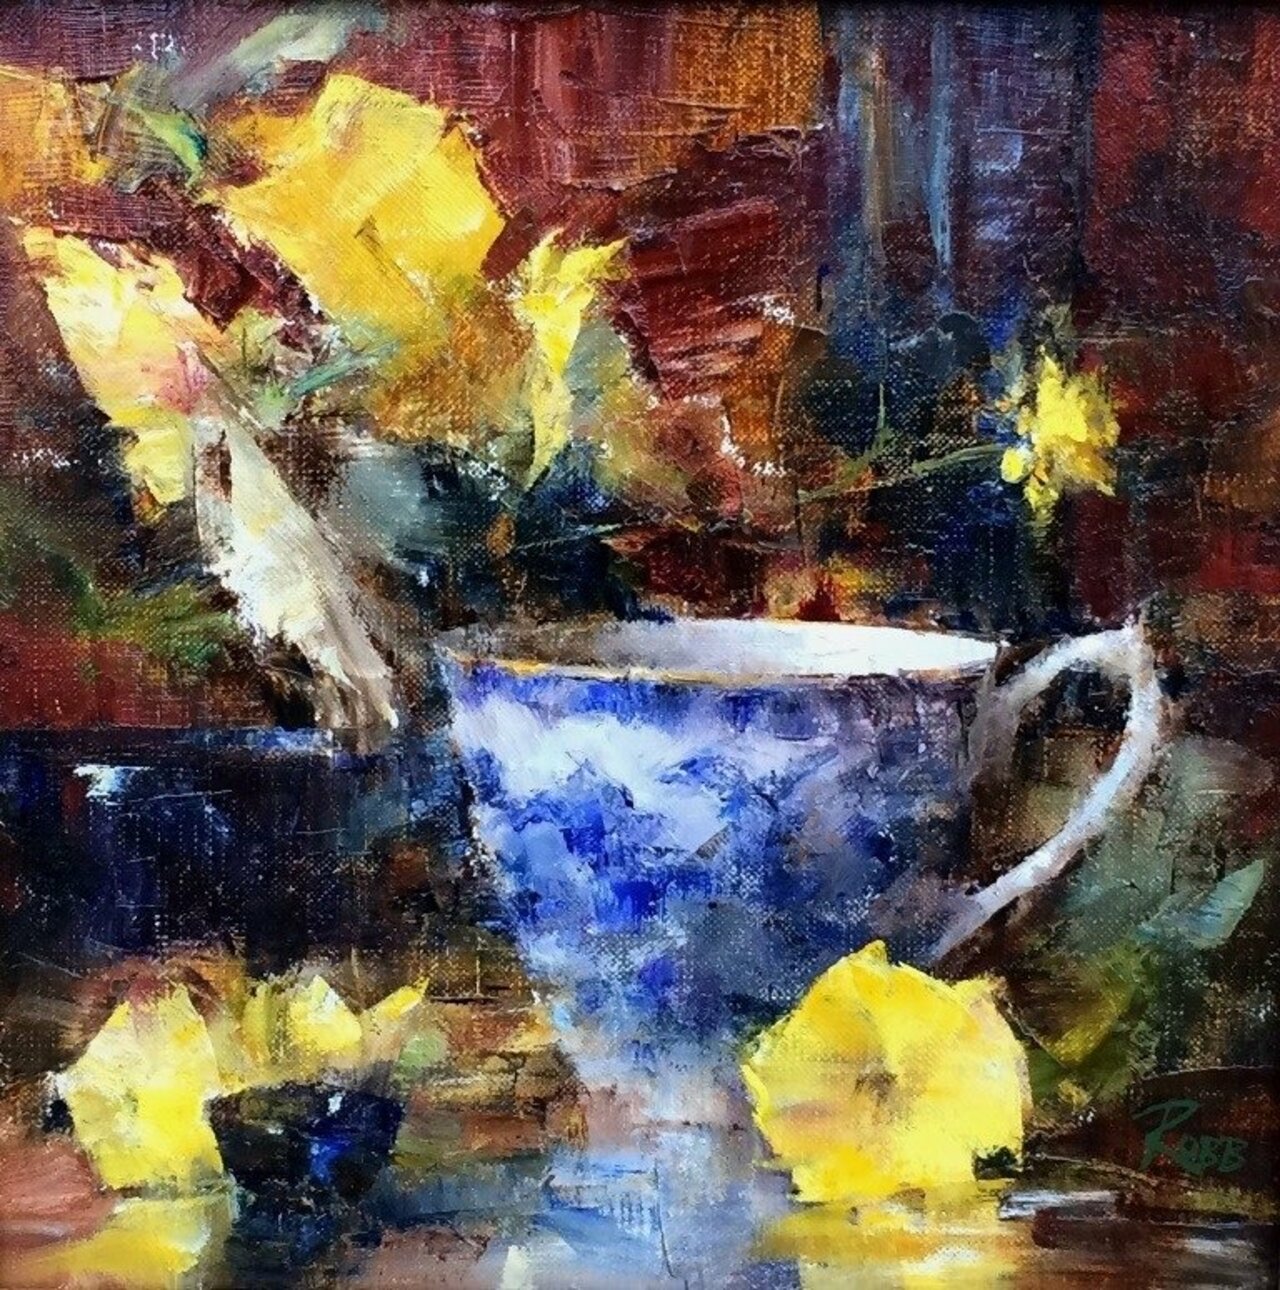 'Yellow Pansies & Tea Cup' by Laura Robb #art https://t.co/lQfcEfnx4r